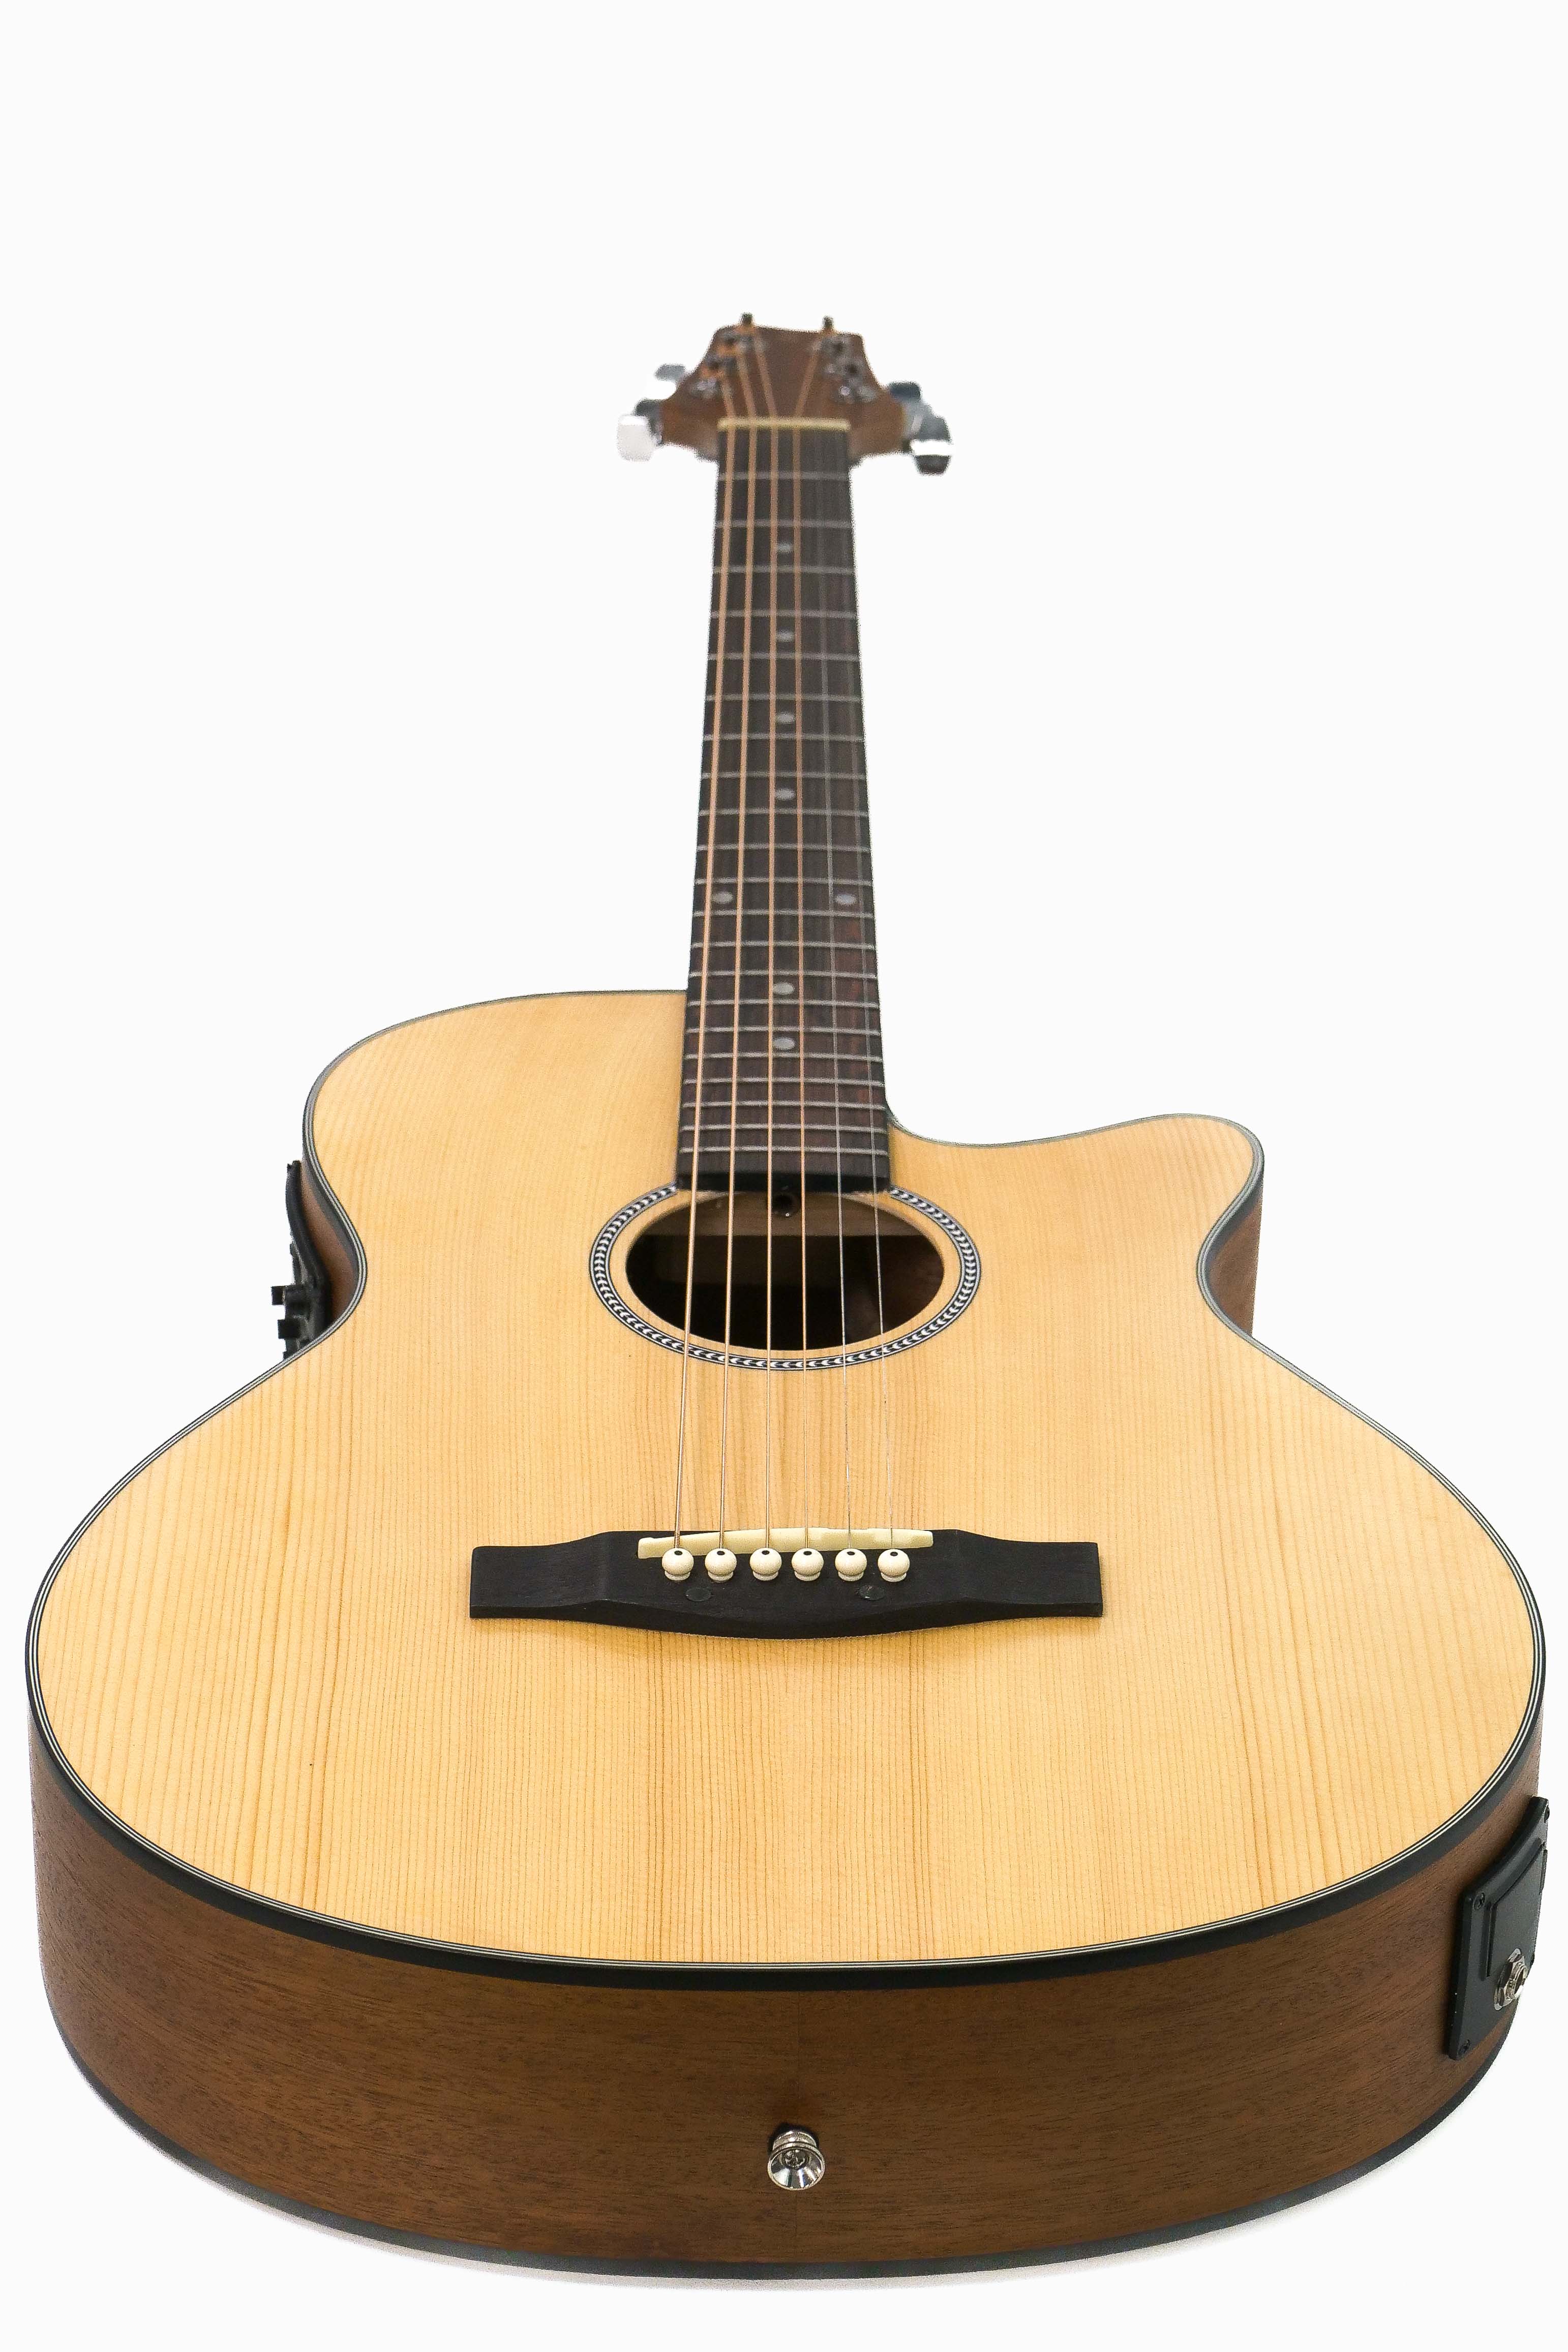 Stagg SA25ACE Spruce Grand Auditorium Acoustic Steel String Electric/Acoustic Cutaway Guitar "TOP GUN"